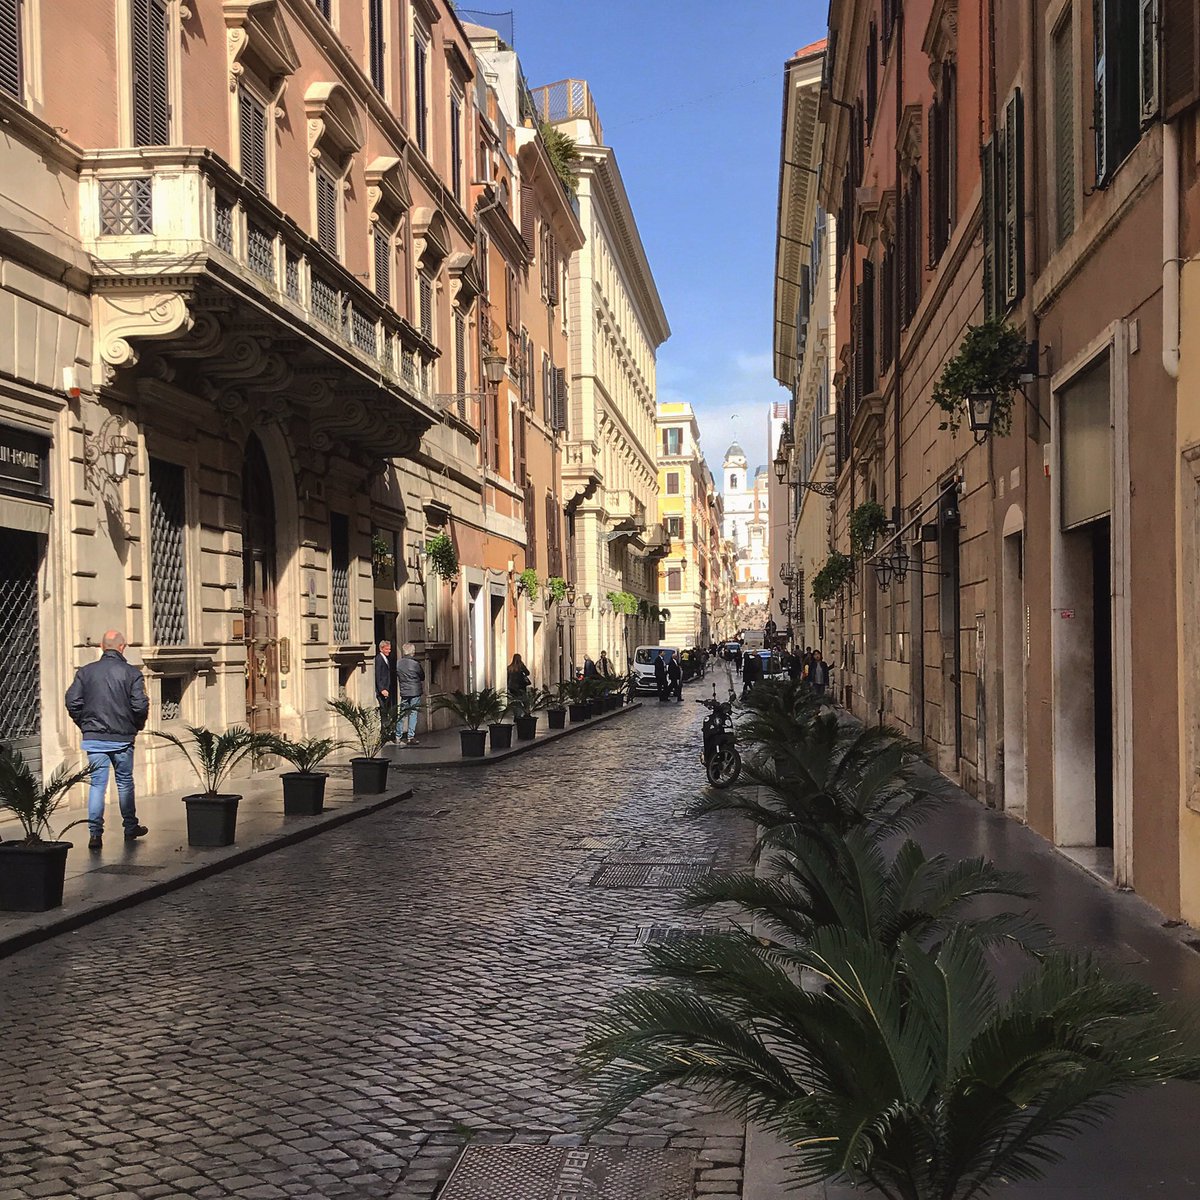 Charming side street in Rome, Italy. Photo by @mydailyRome via @WalkableRome. #walking #tours #travel #photography #worldtraveler